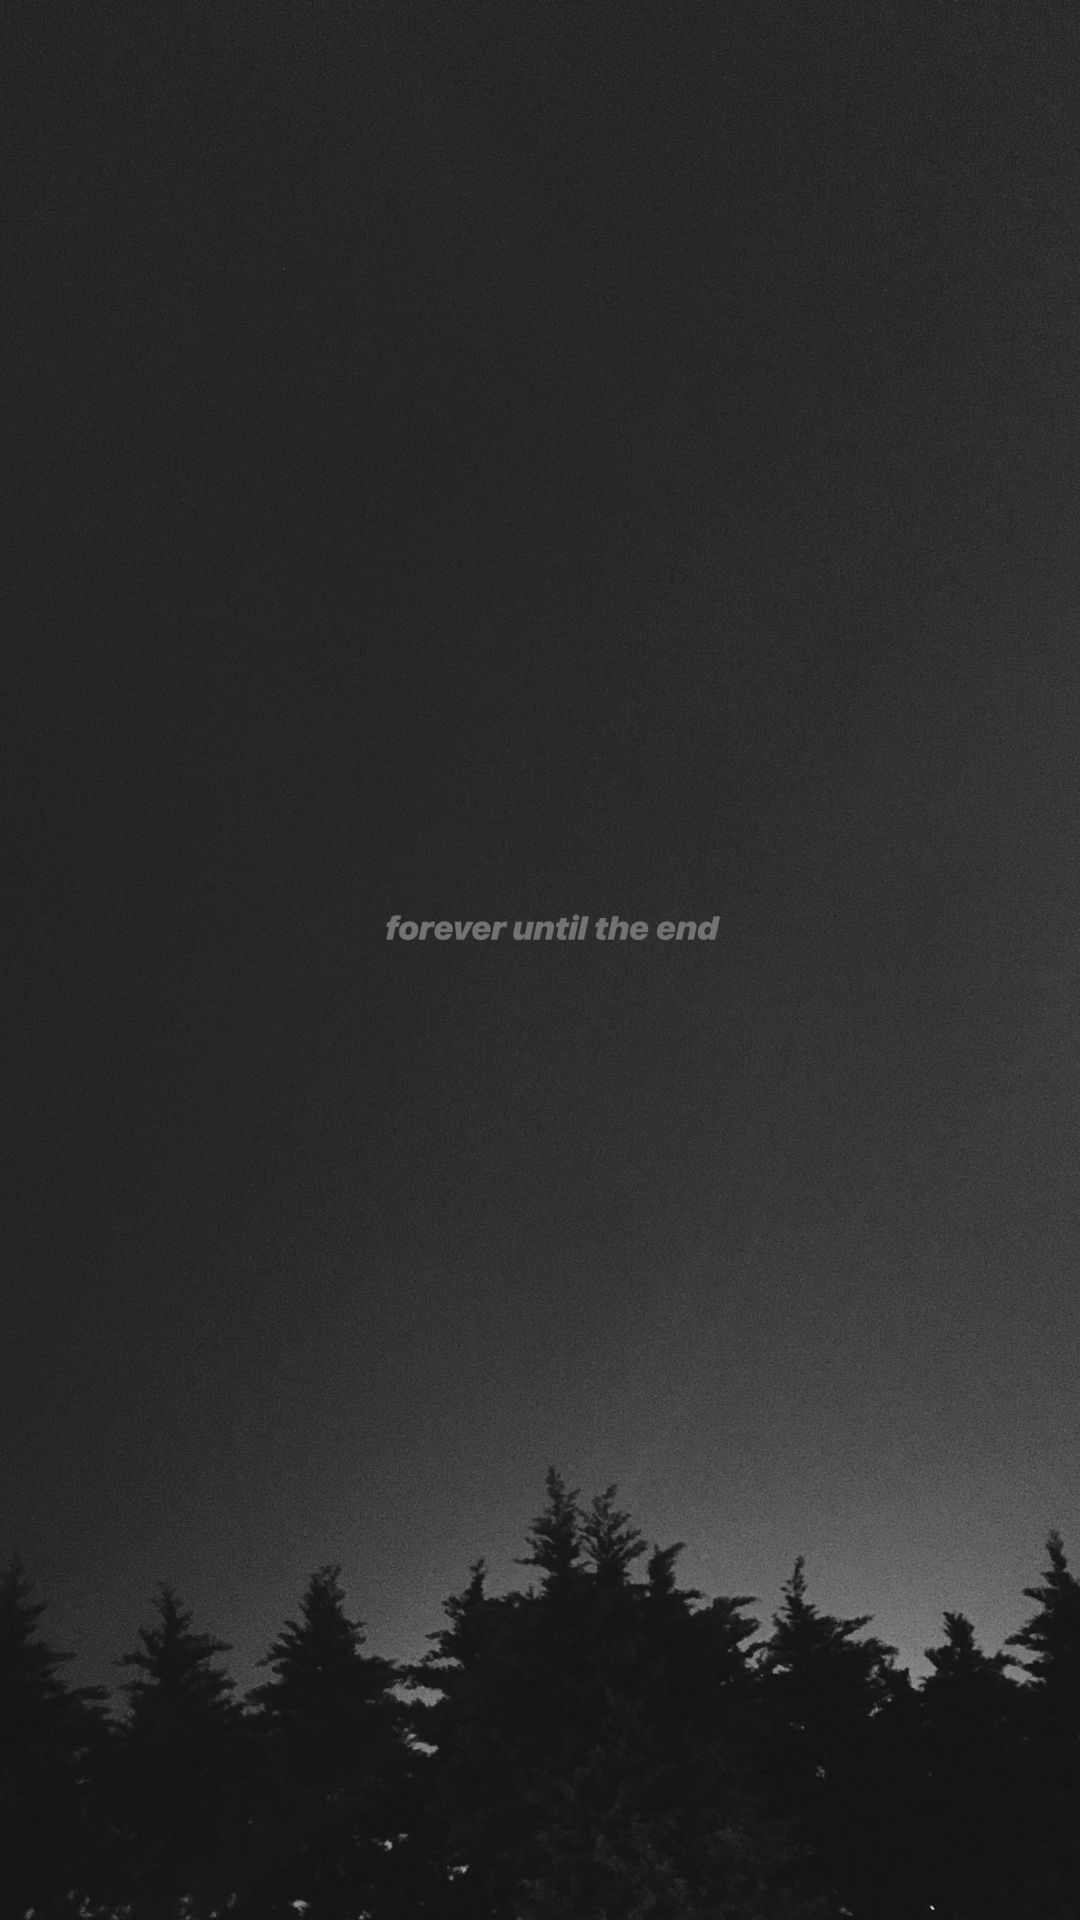 ✓[185+] Forever until the end. للأبد حتی النهاية. Alive. Wallpaper -  Android / iPhone HD Wallpaper Background Download (png / jpg) (2023)